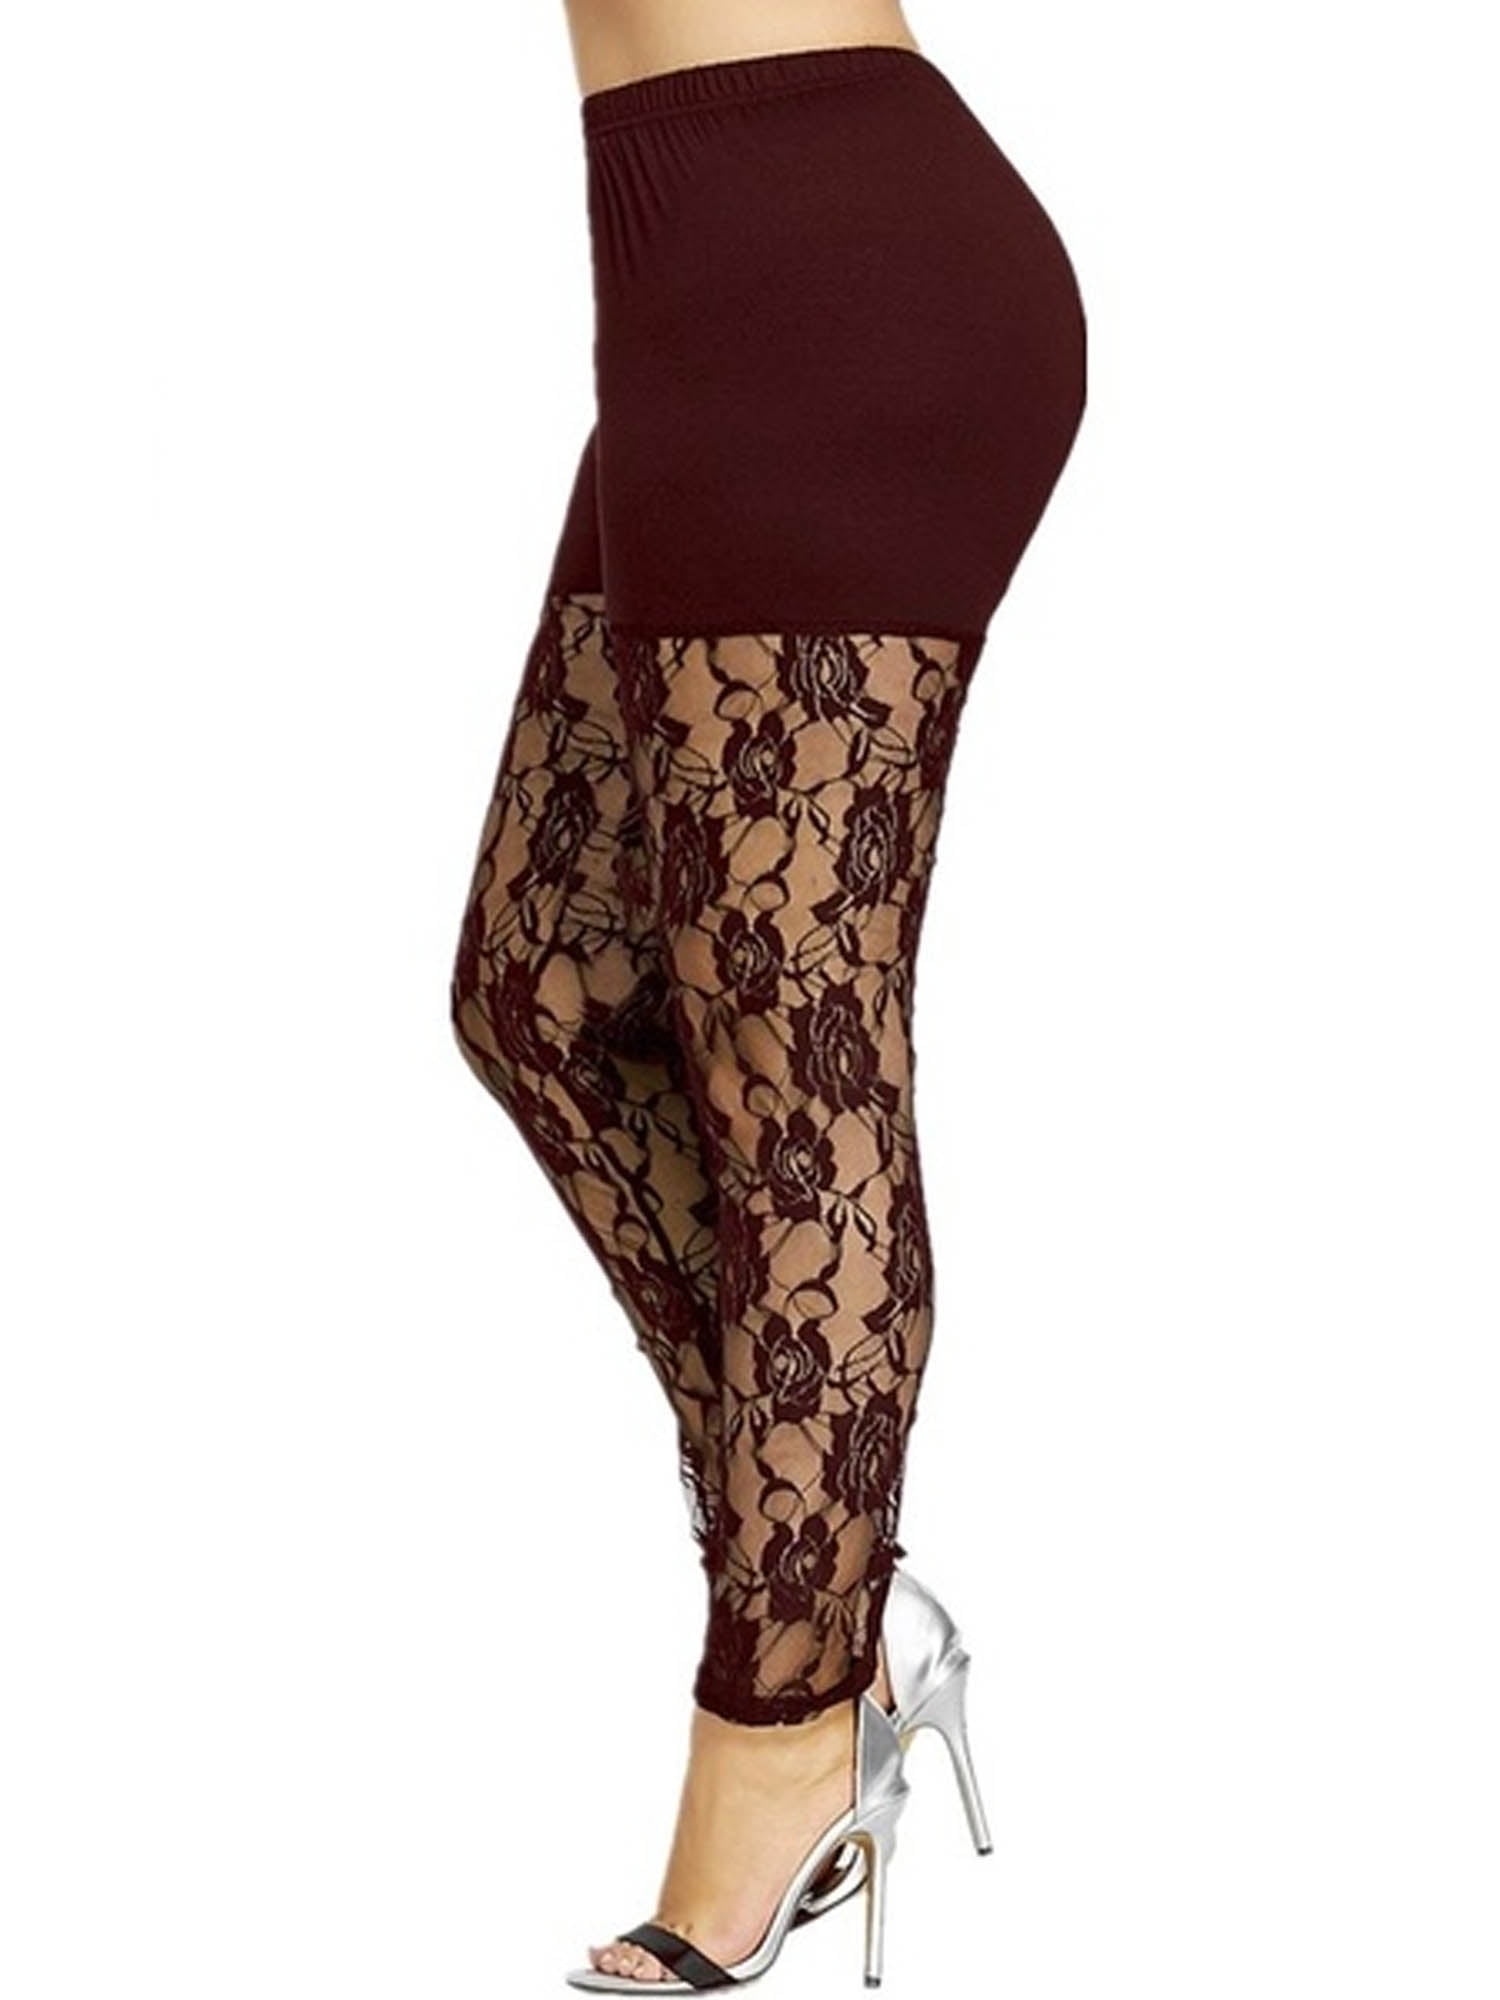 Plus Size Lace Leggings for Women High Waisted Solid Color Skinny